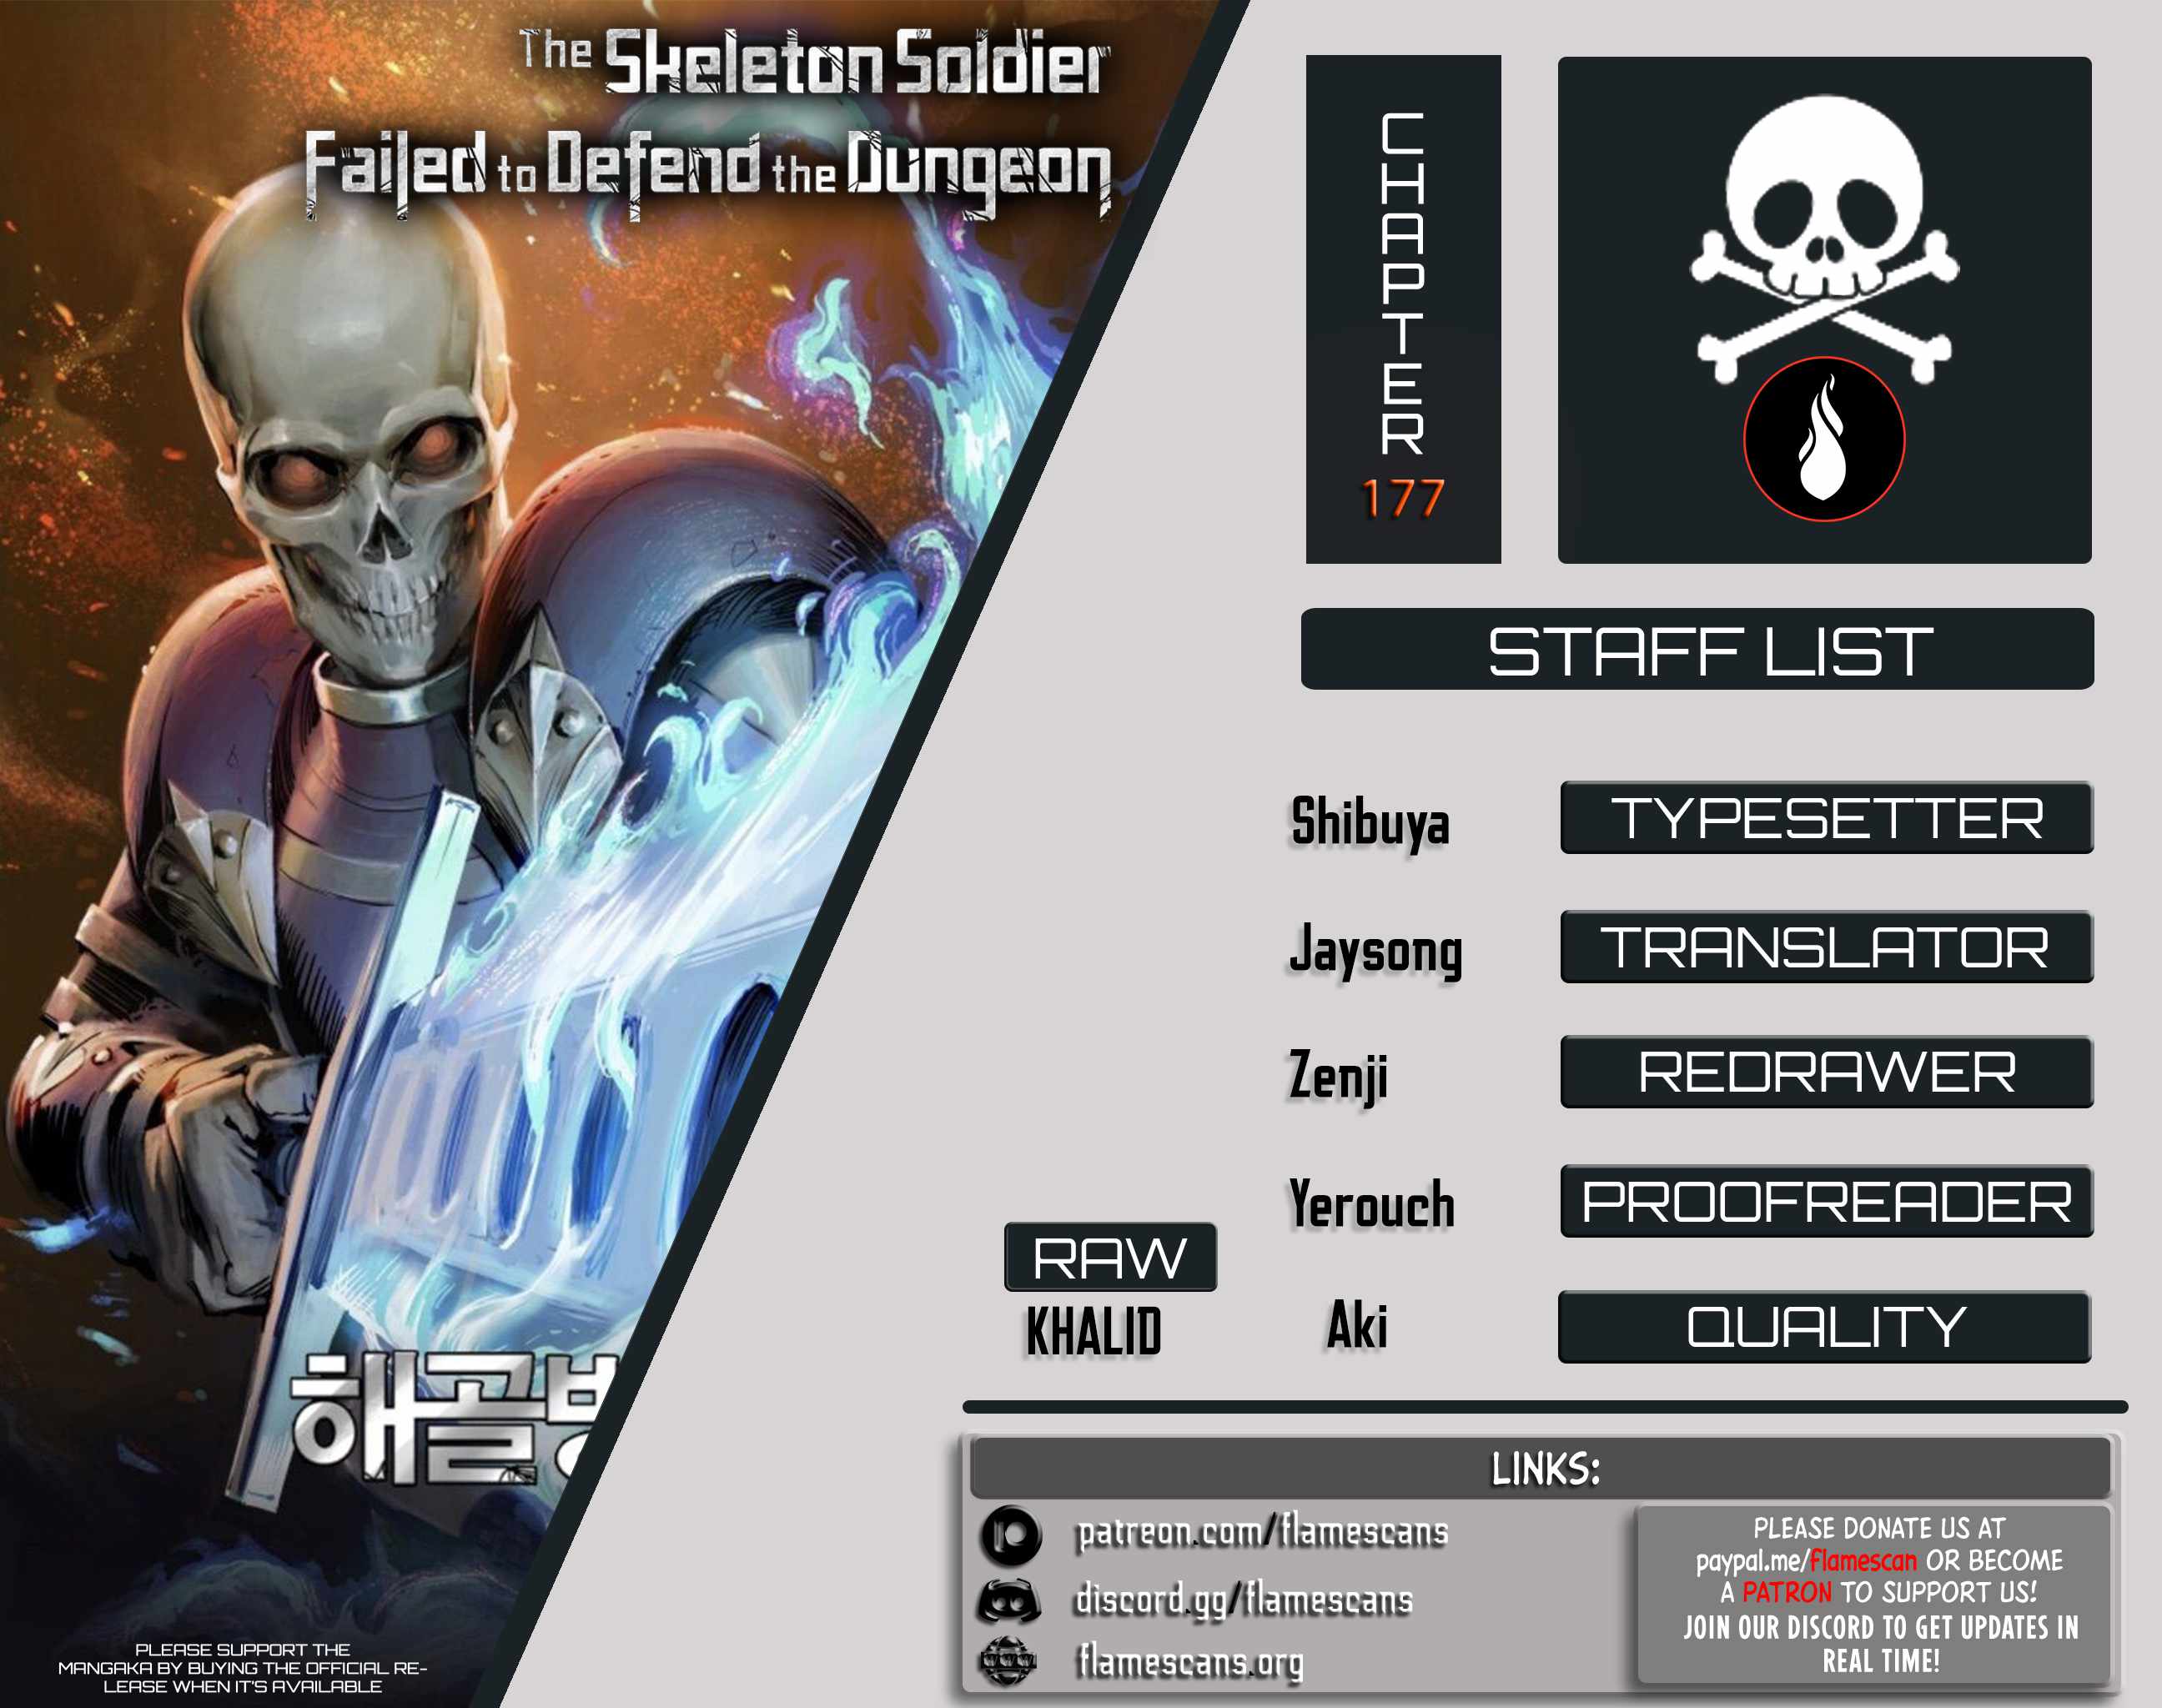 The Skeleton Soldier Failed to Defend the Dungeon [Official] chapter 177